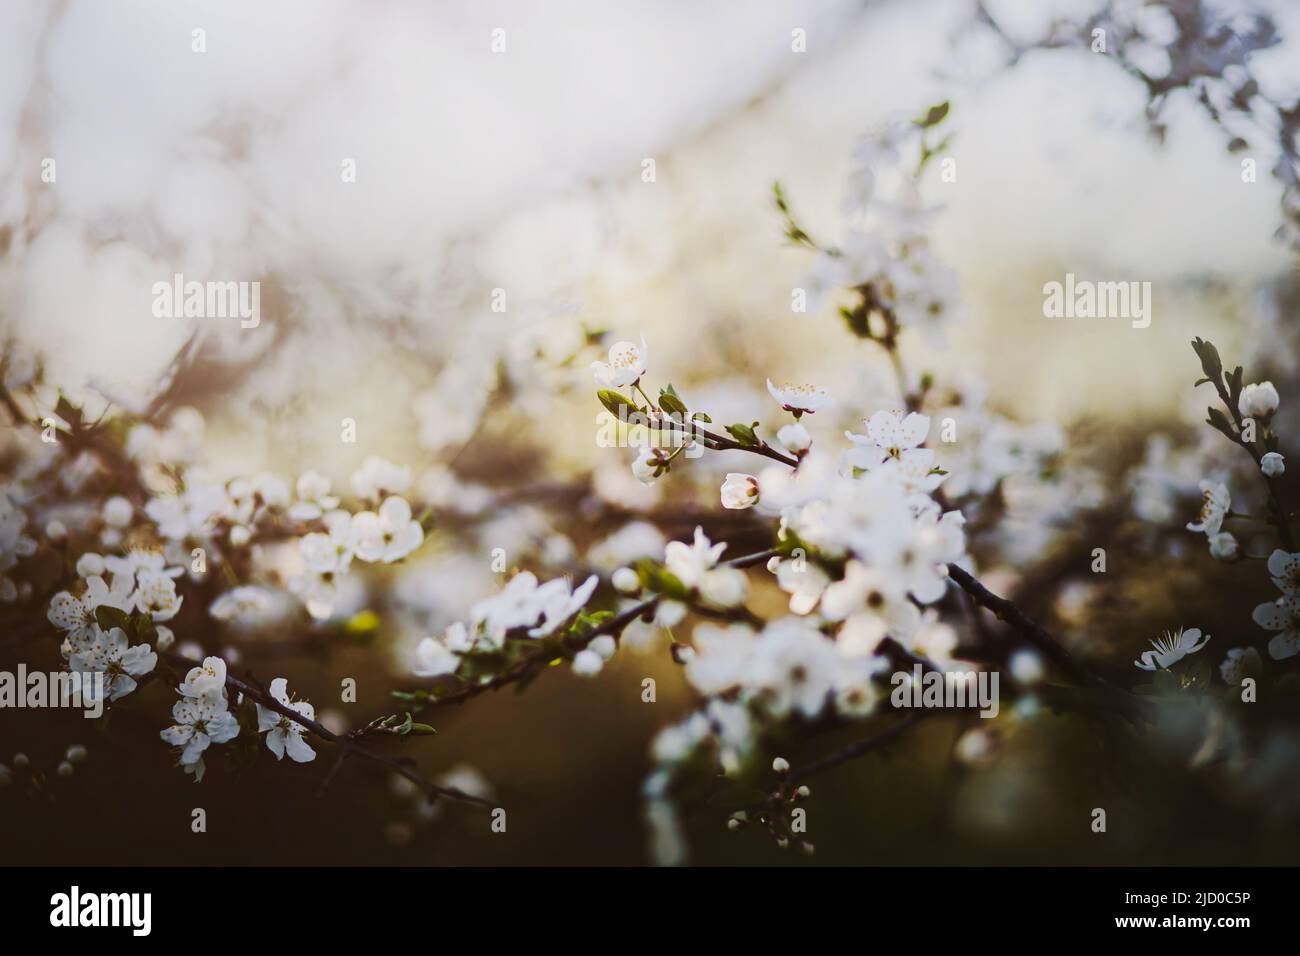 Beautiful fragrant white cherry blossoms bloomed on the curved branches of the tree in late spring on a sunny day. The beauty of nature. Stock Photo